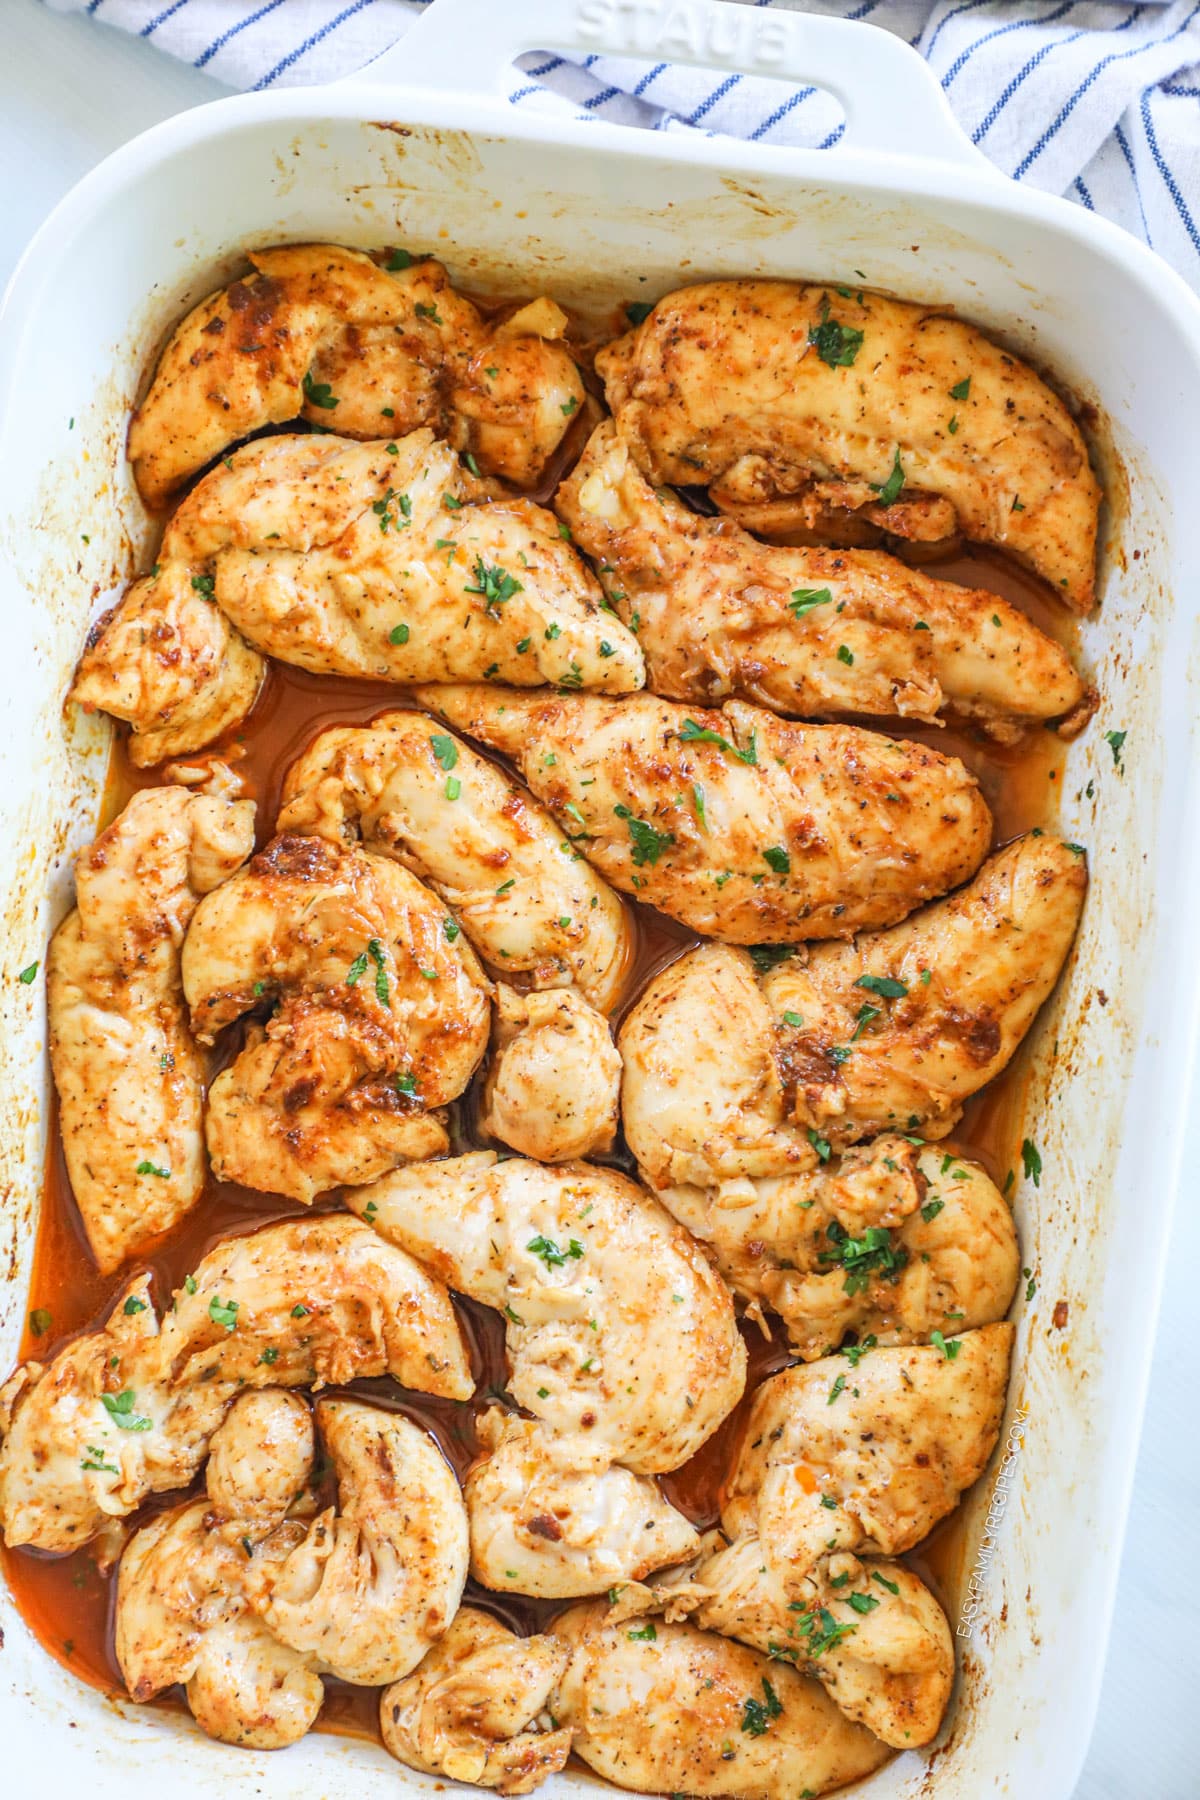 Oven baked chicken tenders with no breading in a white casserole dish